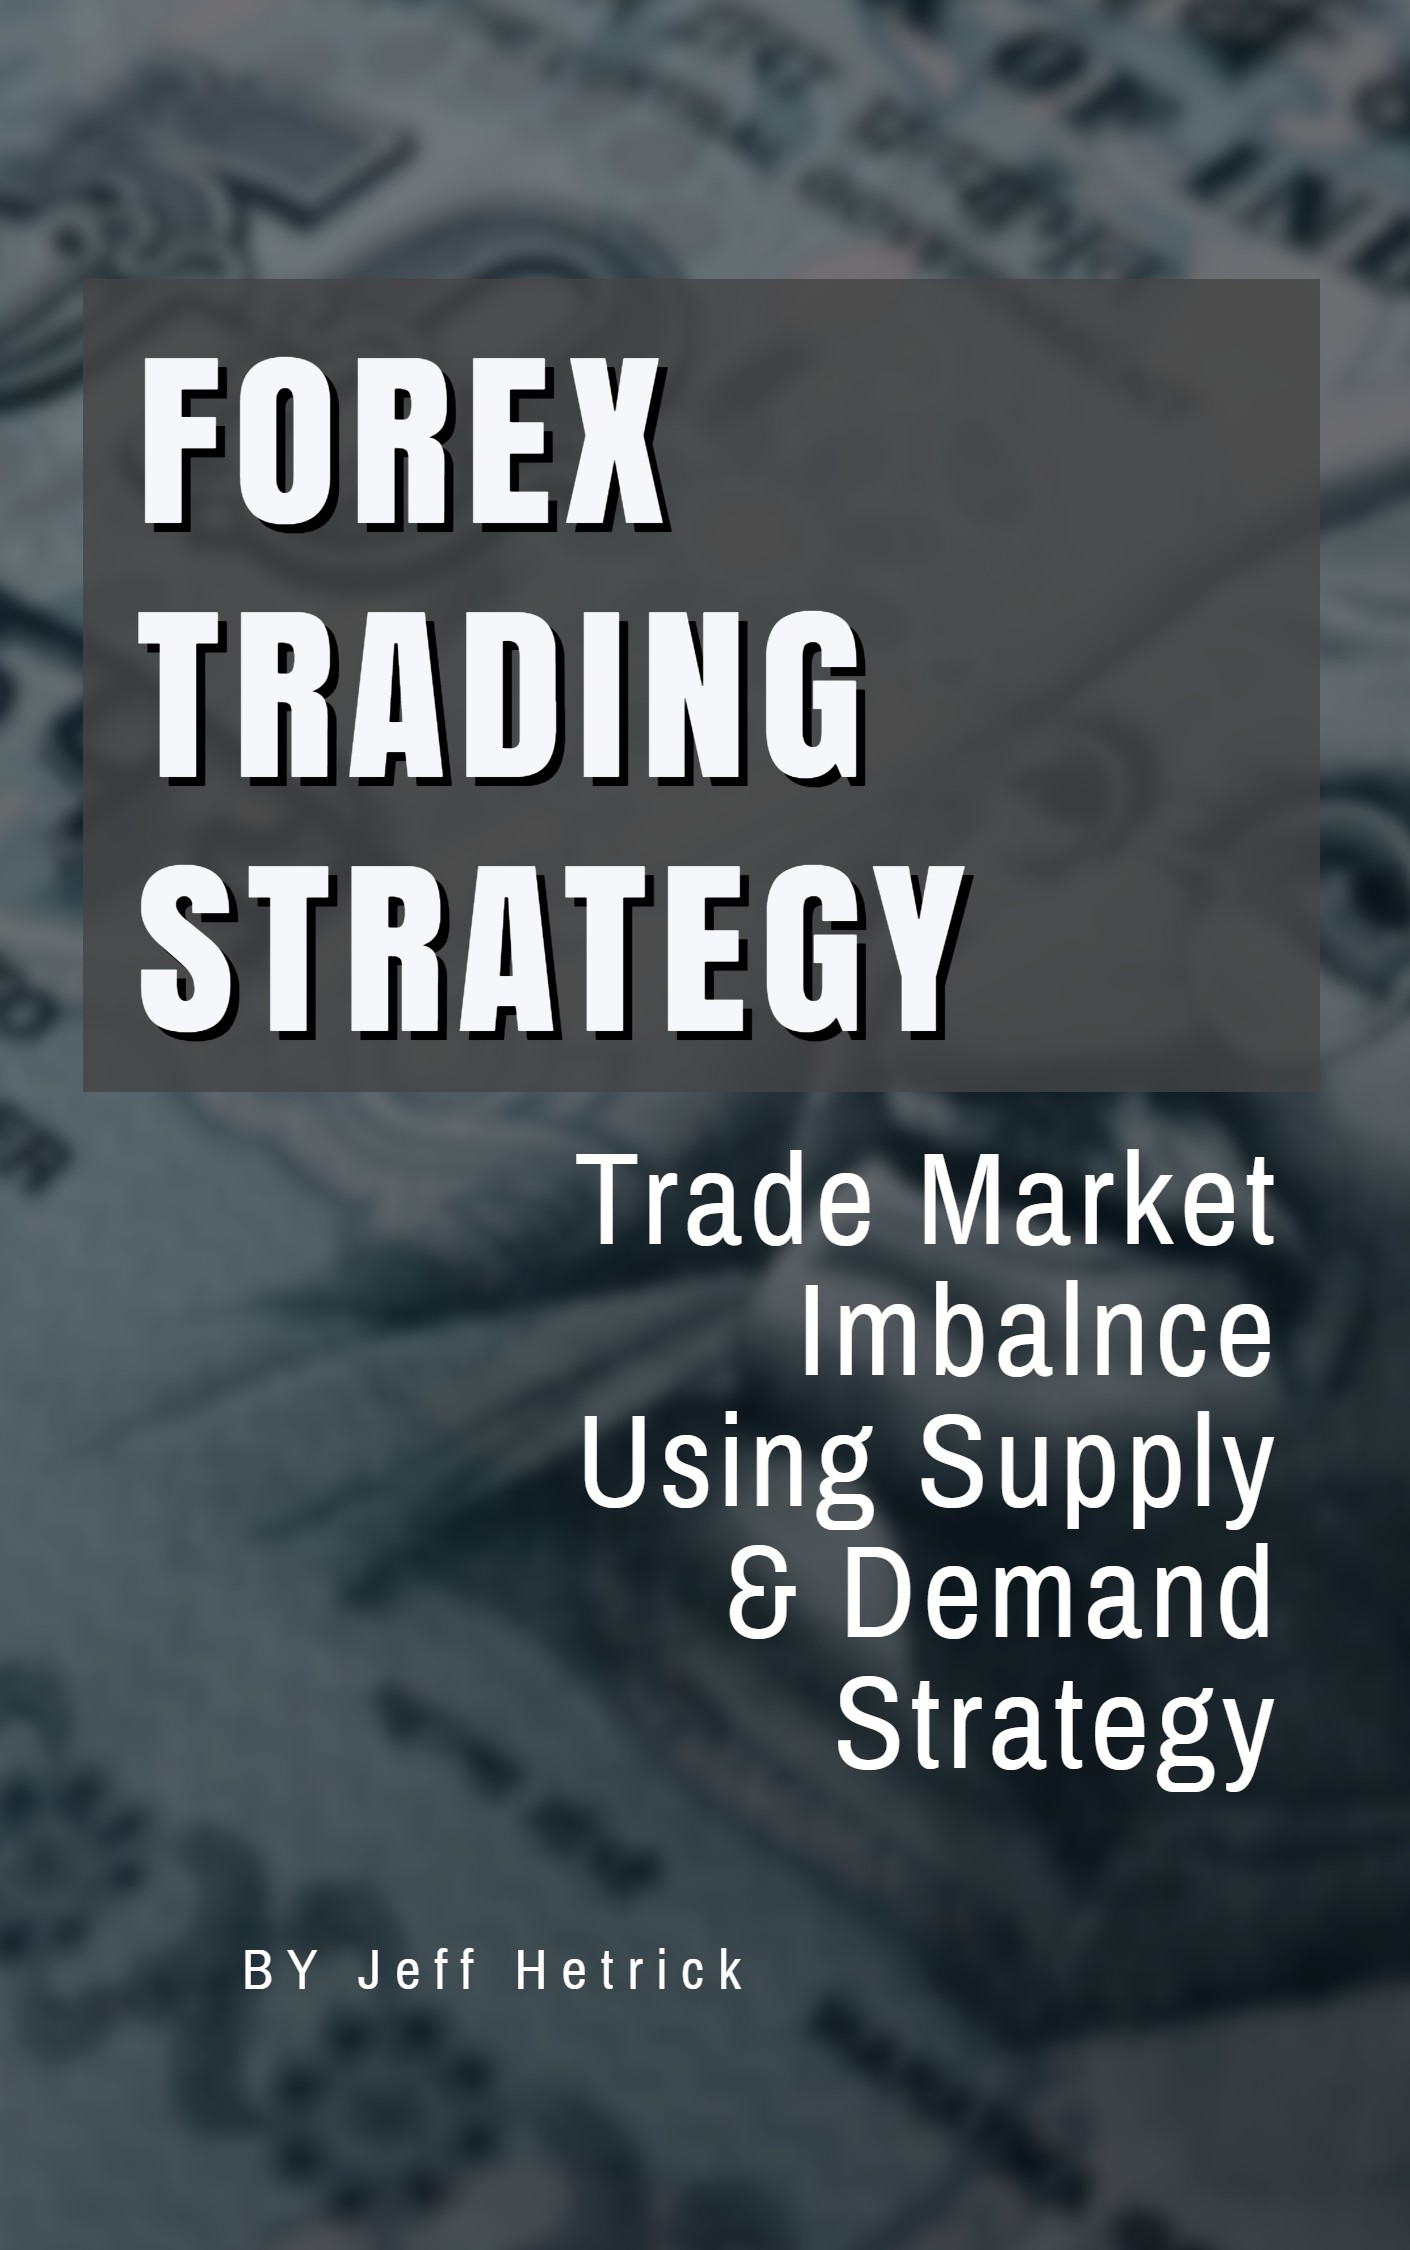 Forex Trading Strategy Trade Market Imbalance Using Supply Demand Strategy An Ebook By Jeff Hetrick - 